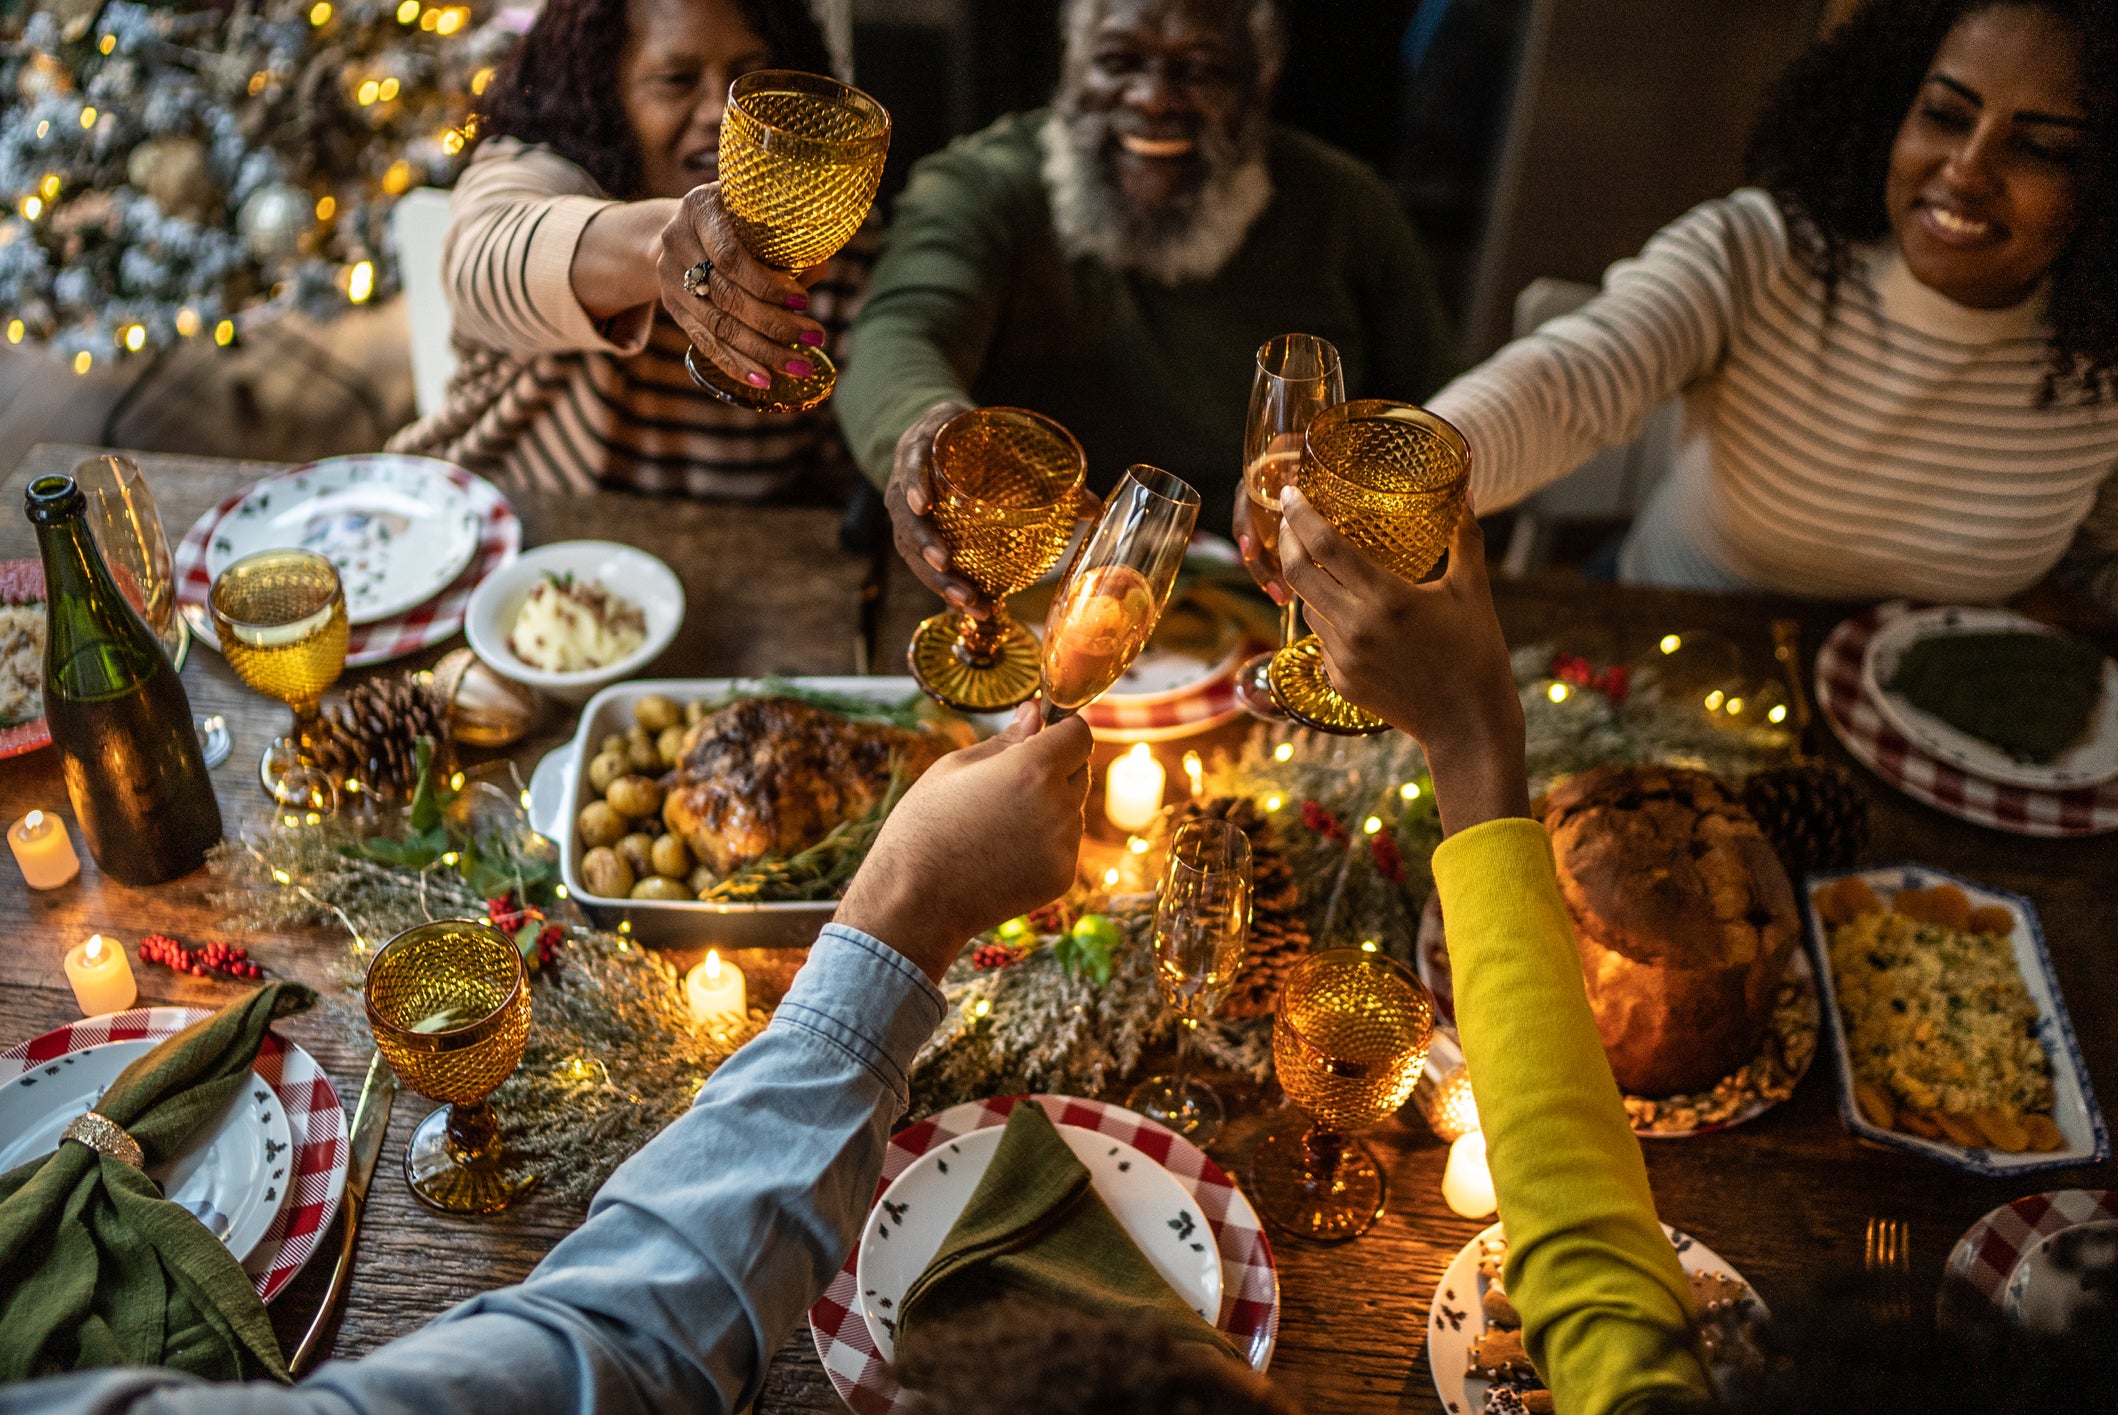 The Best Wines And Bubbles To Pair With Your Favorite Holiday Fare